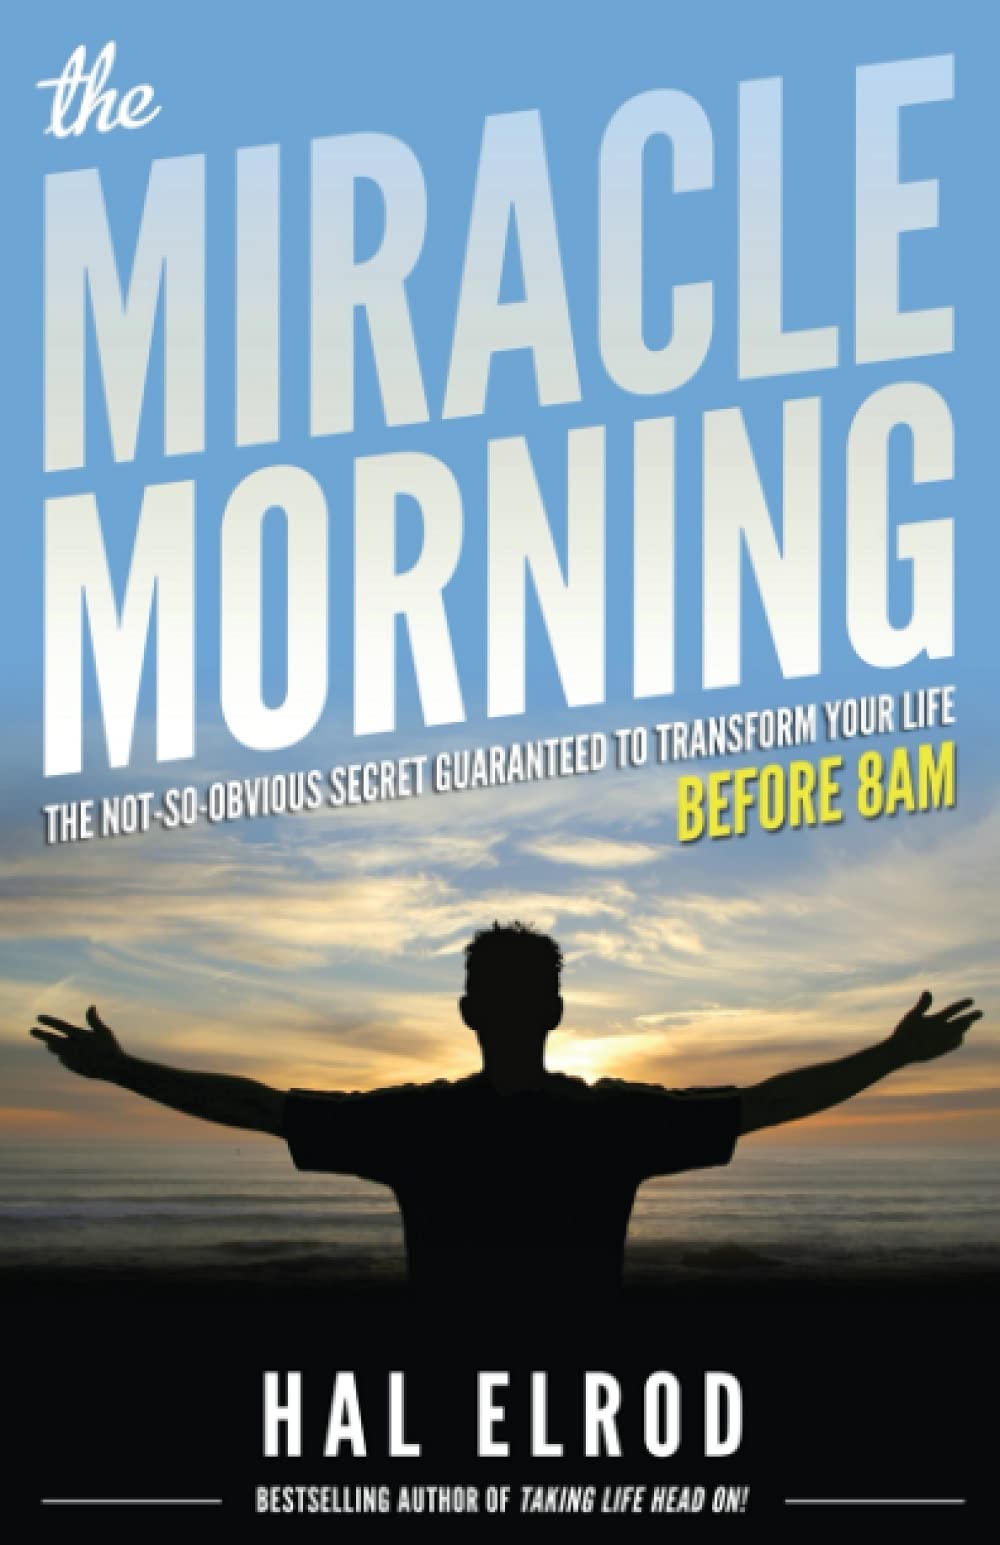 The Miracle Morning by Hal Elrod book review